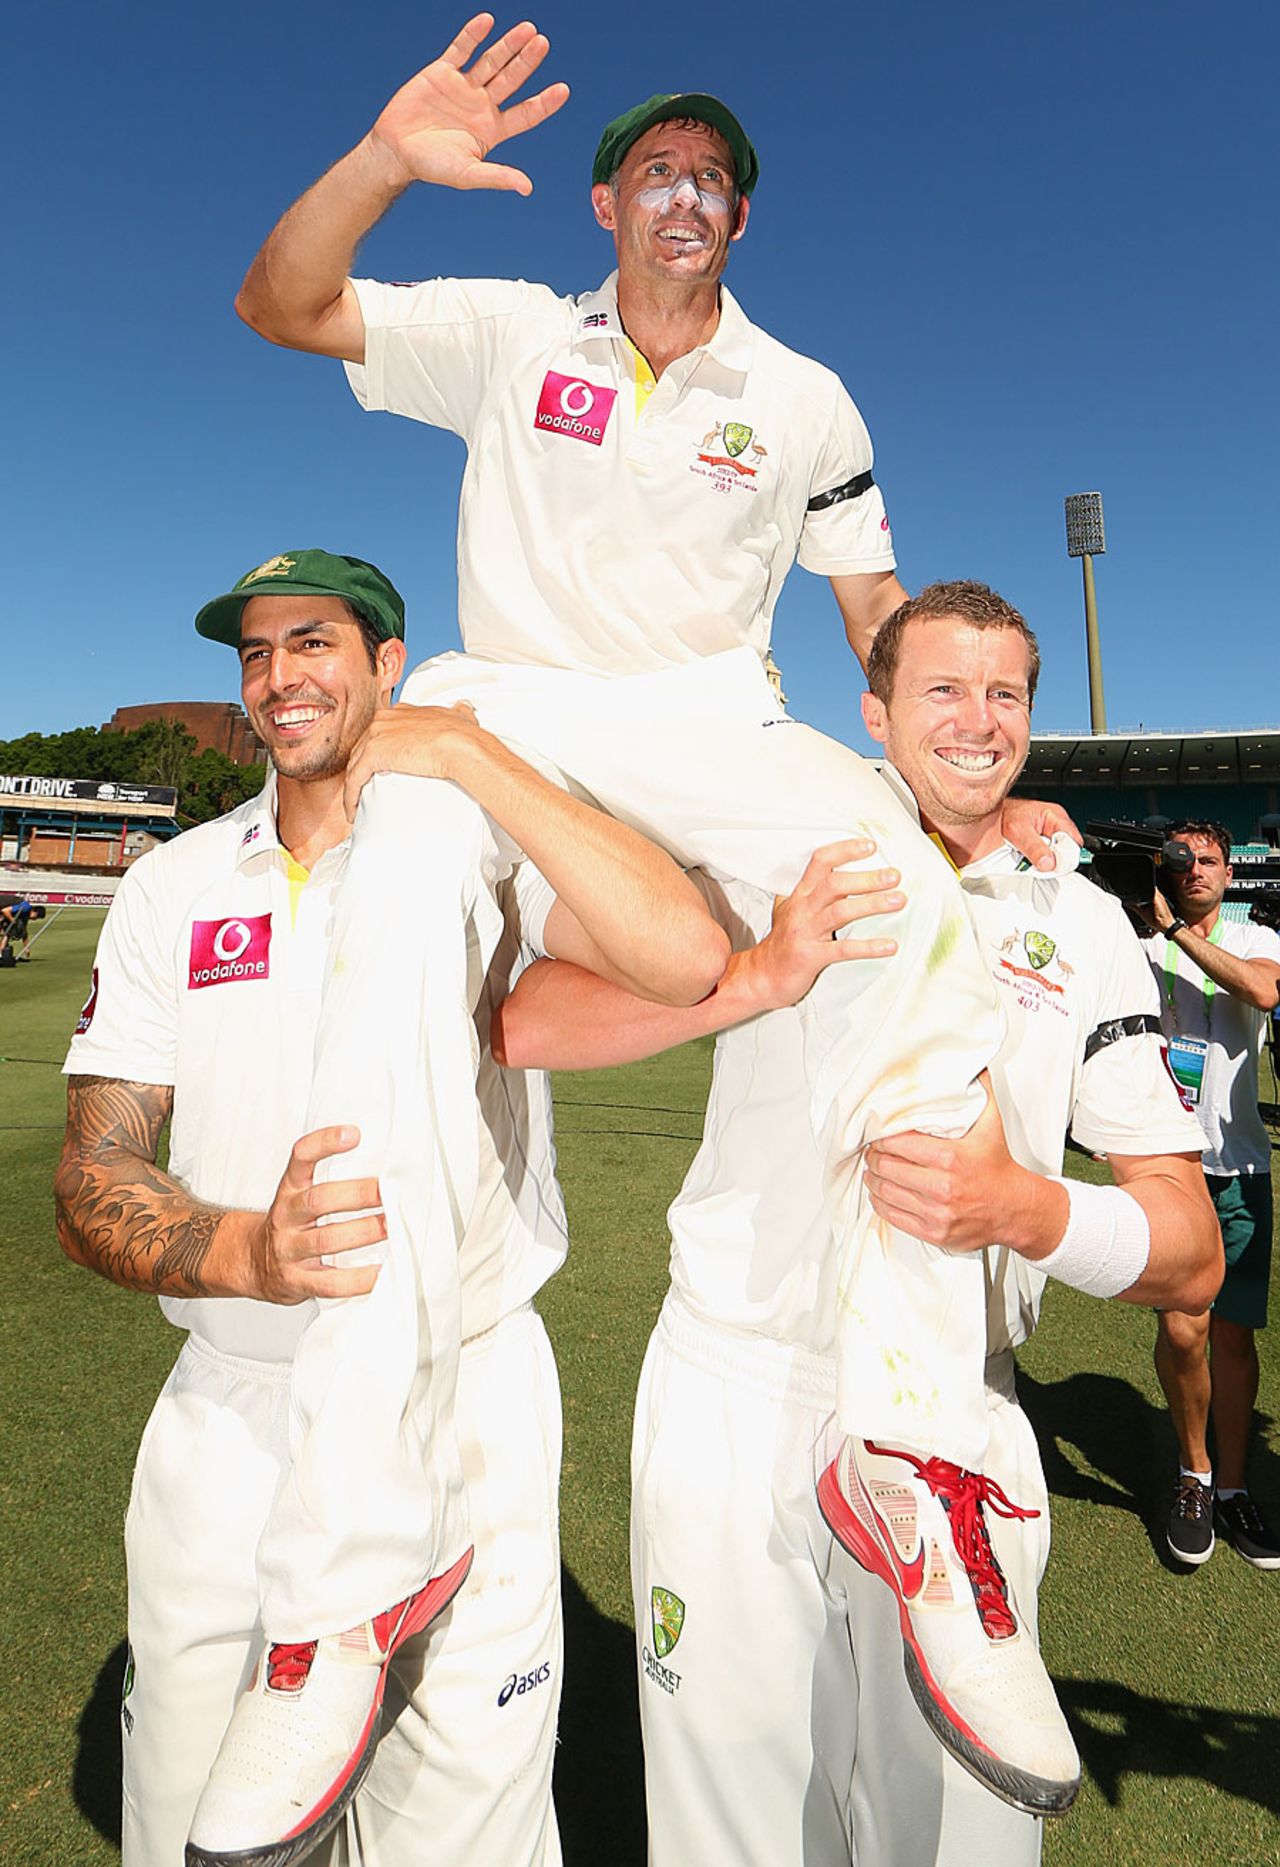 Michael Hussey is carried off the field on the shoulders of Mitchell Johnson and Peter Siddle, Australia v Sri Lanka, 3rd Test, Sydney, 4th day, January 6, 2013